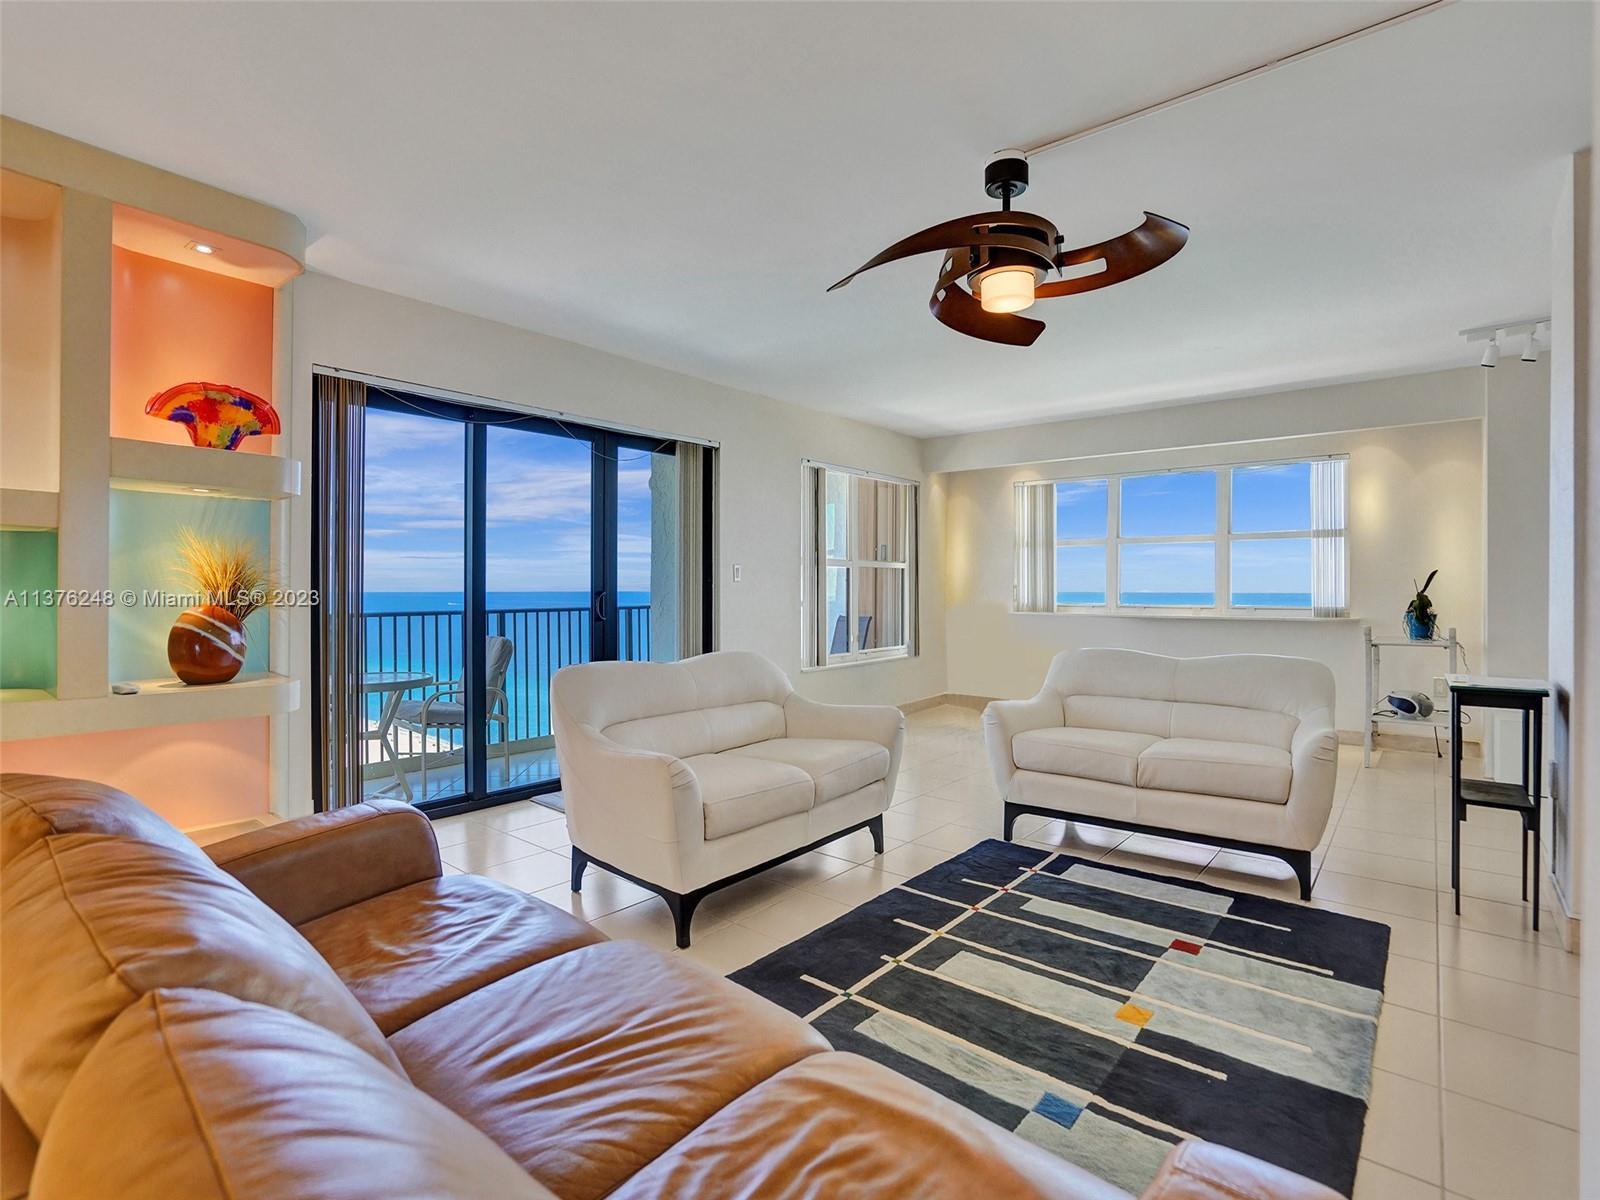 PENTHOUSE CORNER UNIT WITH DIRECT OCEAN VIEWS IN A COUNTRY CLUB SETTING. 2,000 SF  DECORATOR ART WAL